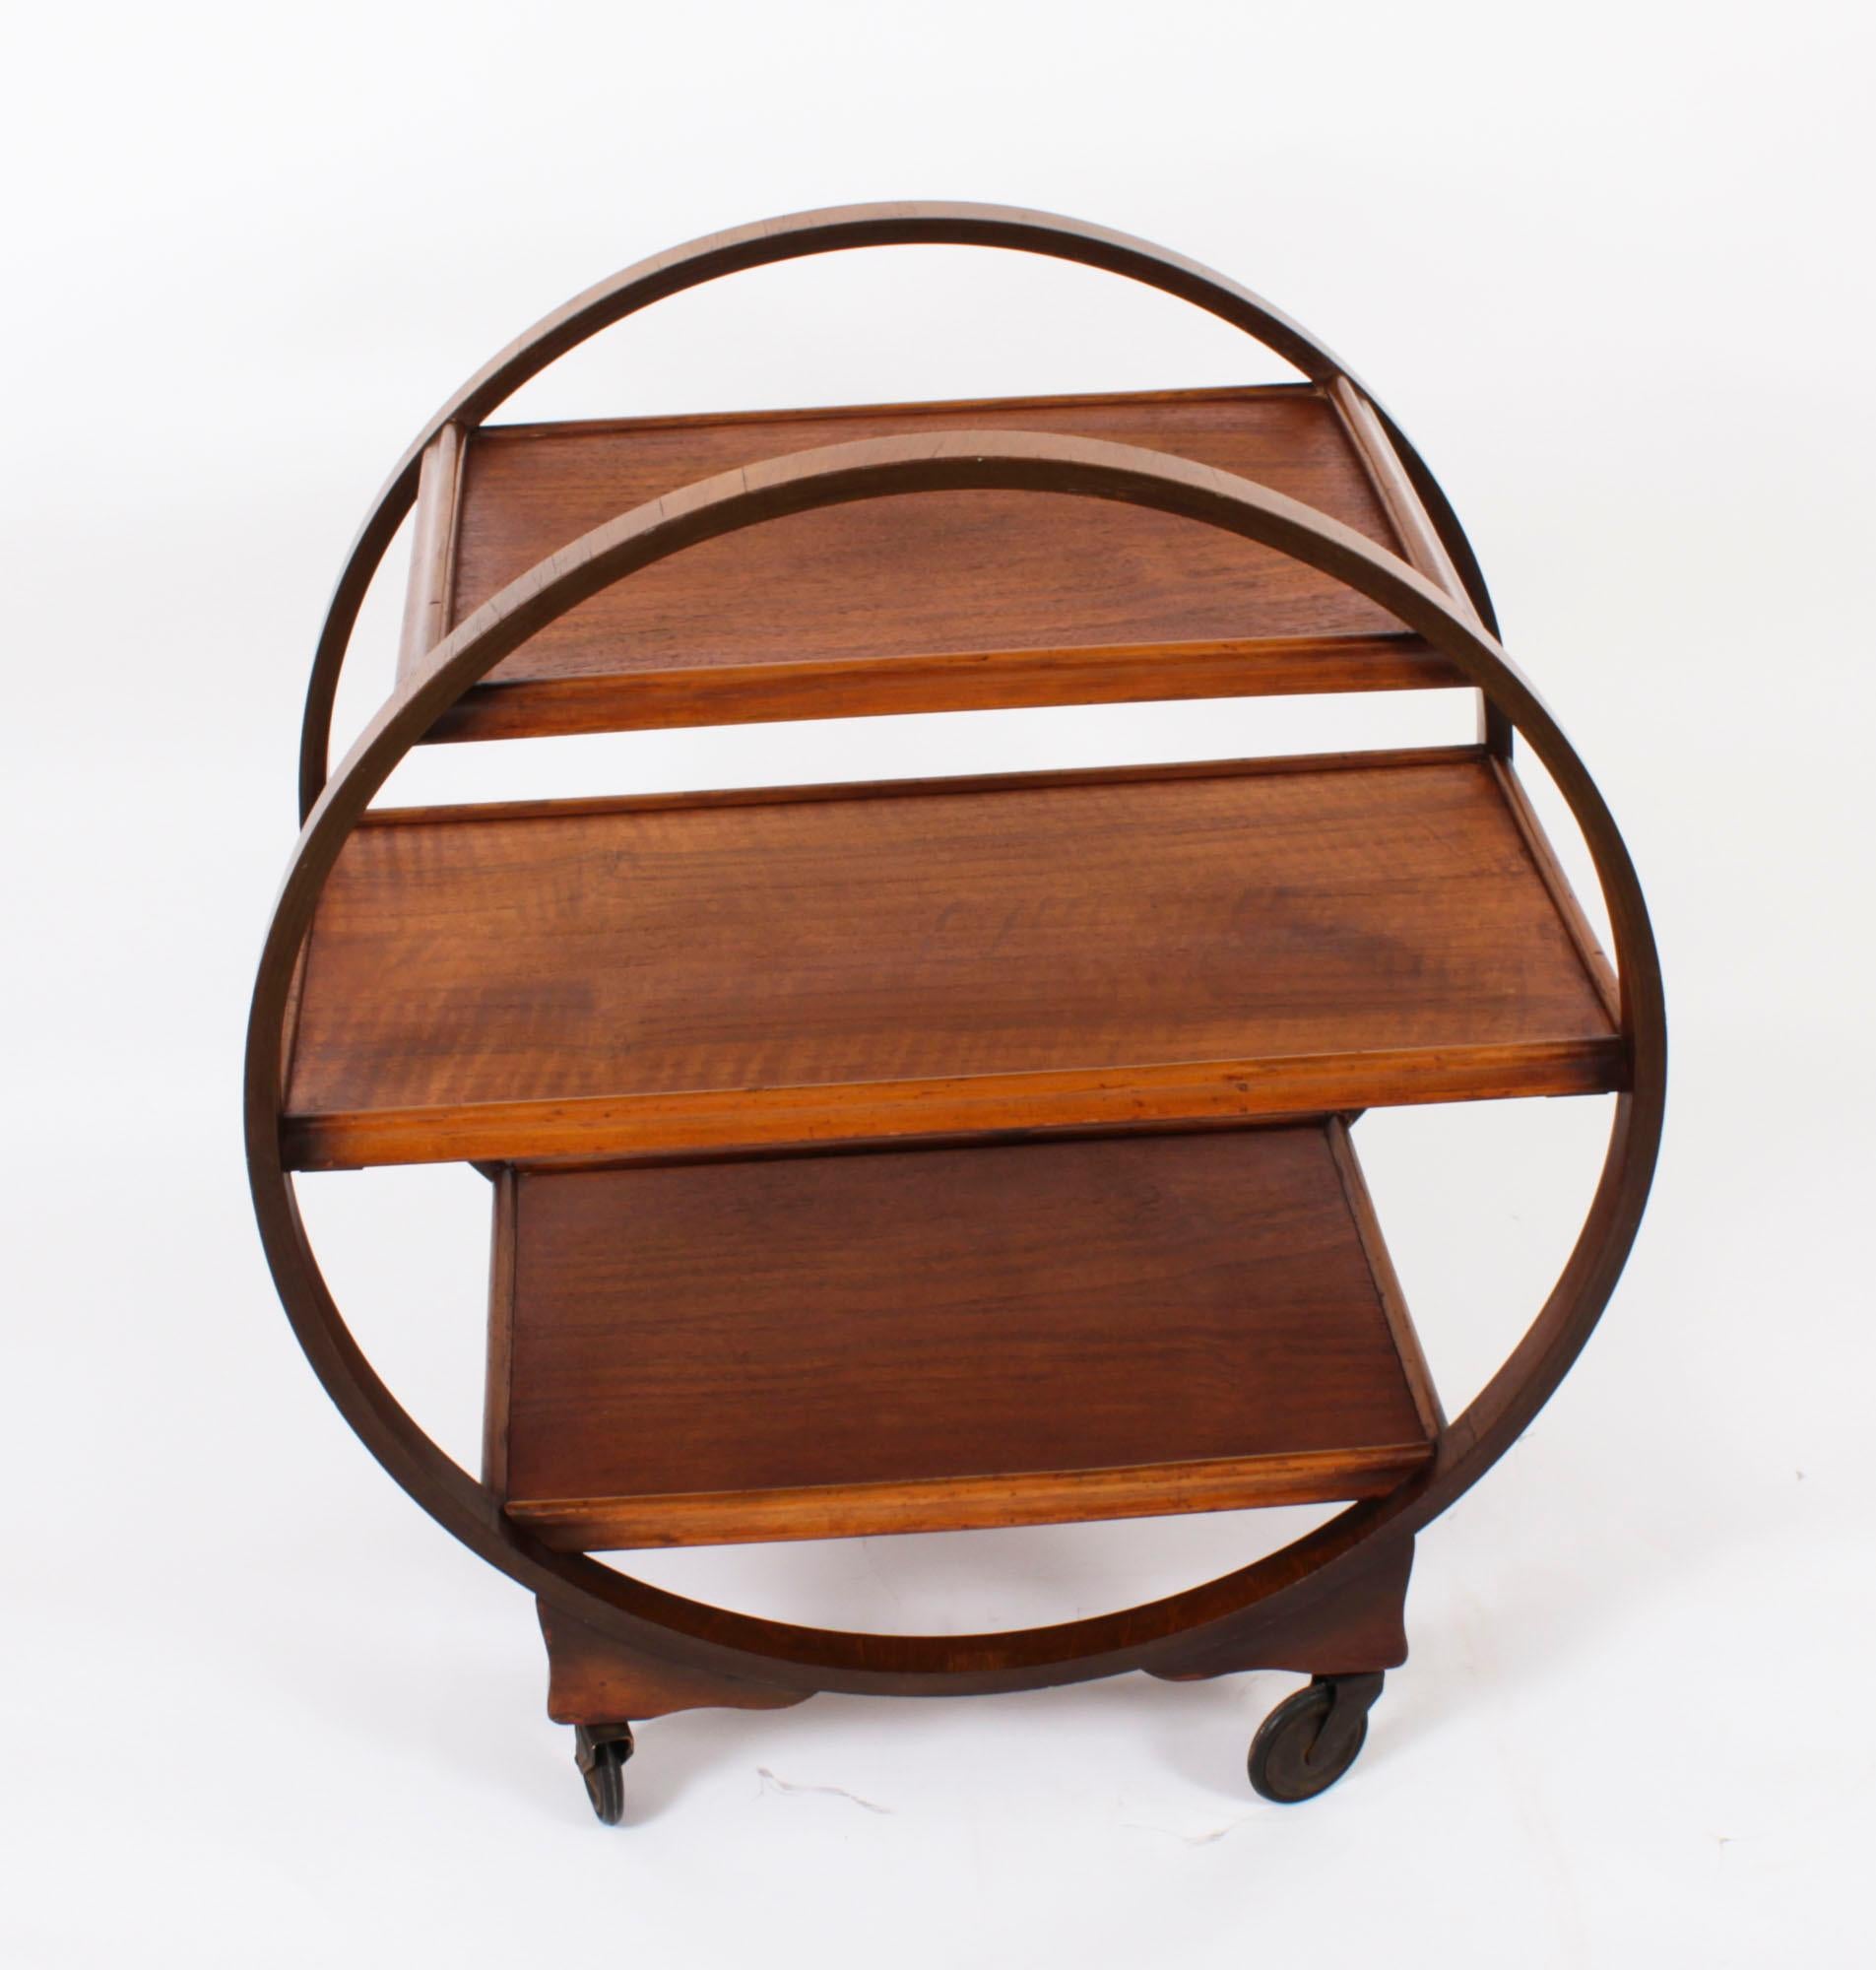 This is a striking antique Art Deco  three-tier figured walnut hostess trolley dating from the 1920s.

The trolley is of decorative circular form and is fitted with castors.

This is a very entertaining serving trolley which can also be used as a